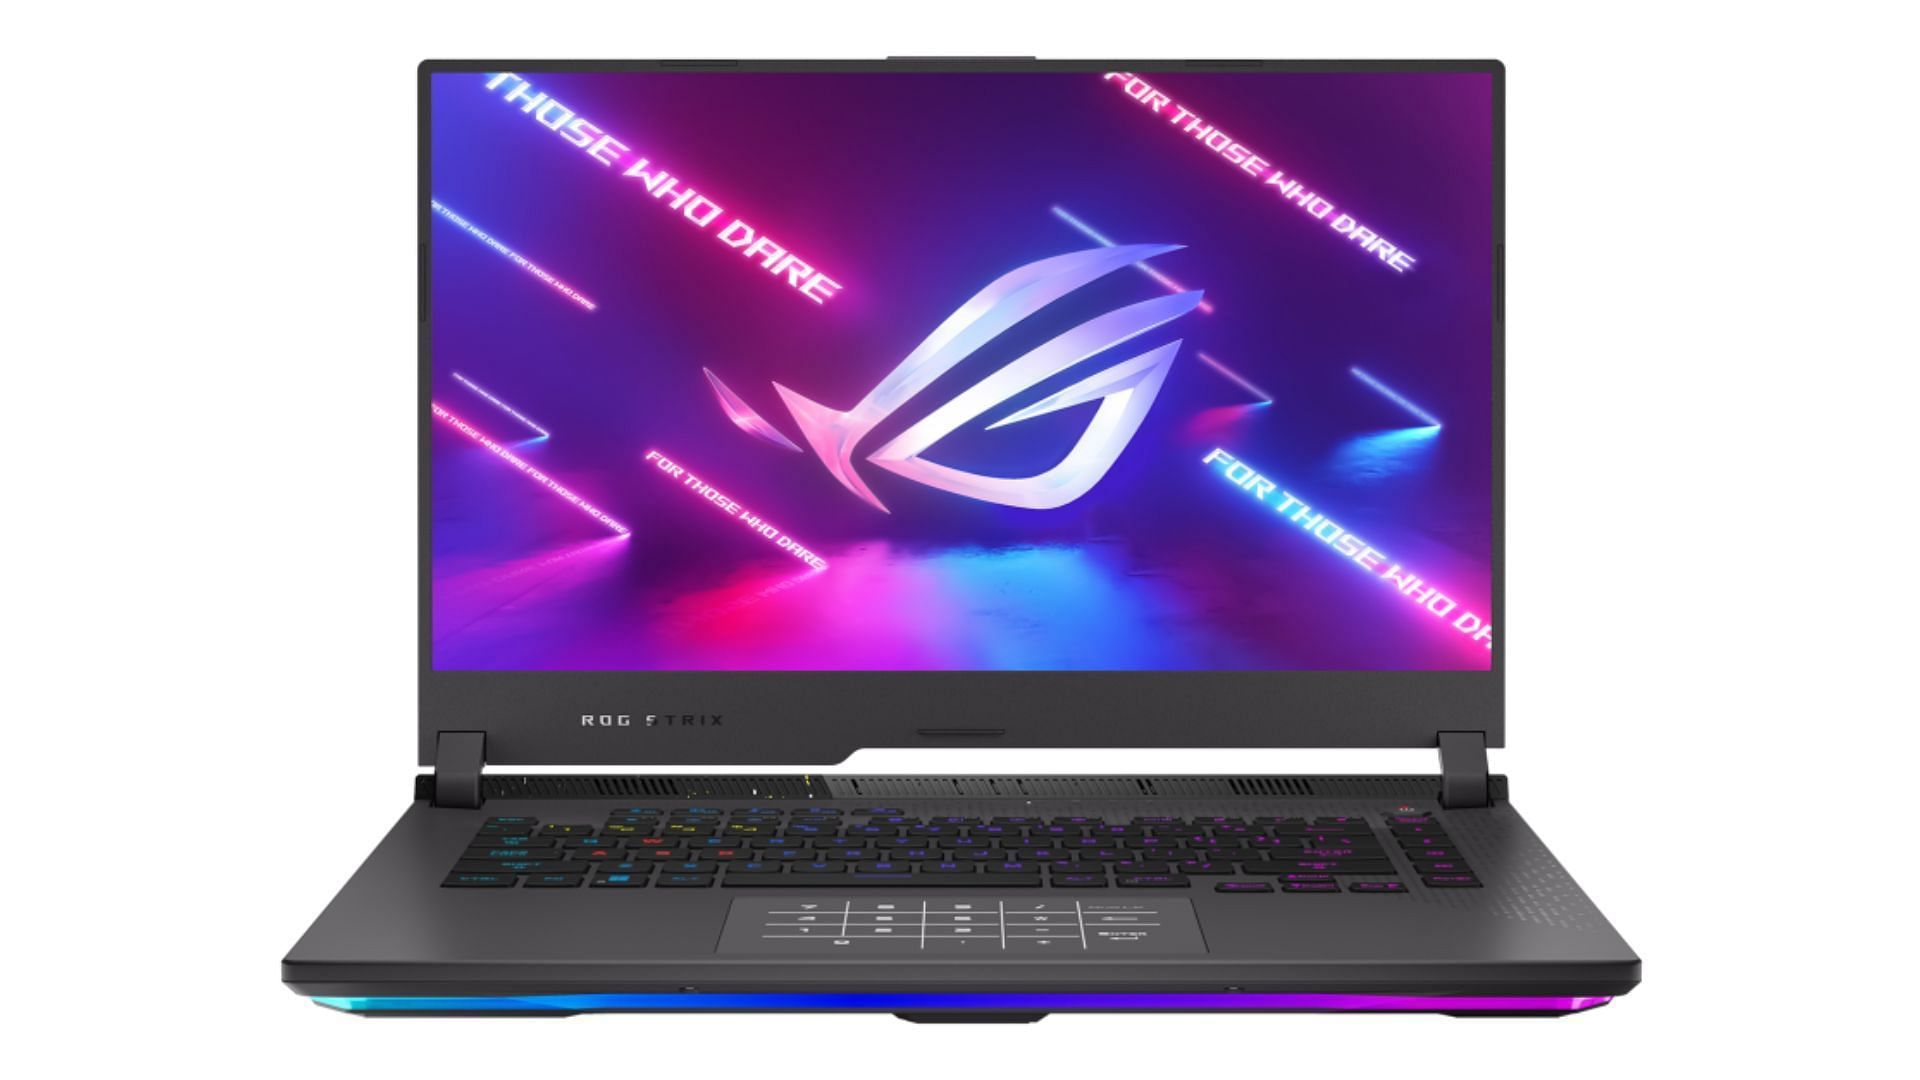 Asus ROG Strix G15 is one of the best 15-inch gaming laptops (Image via Asus)